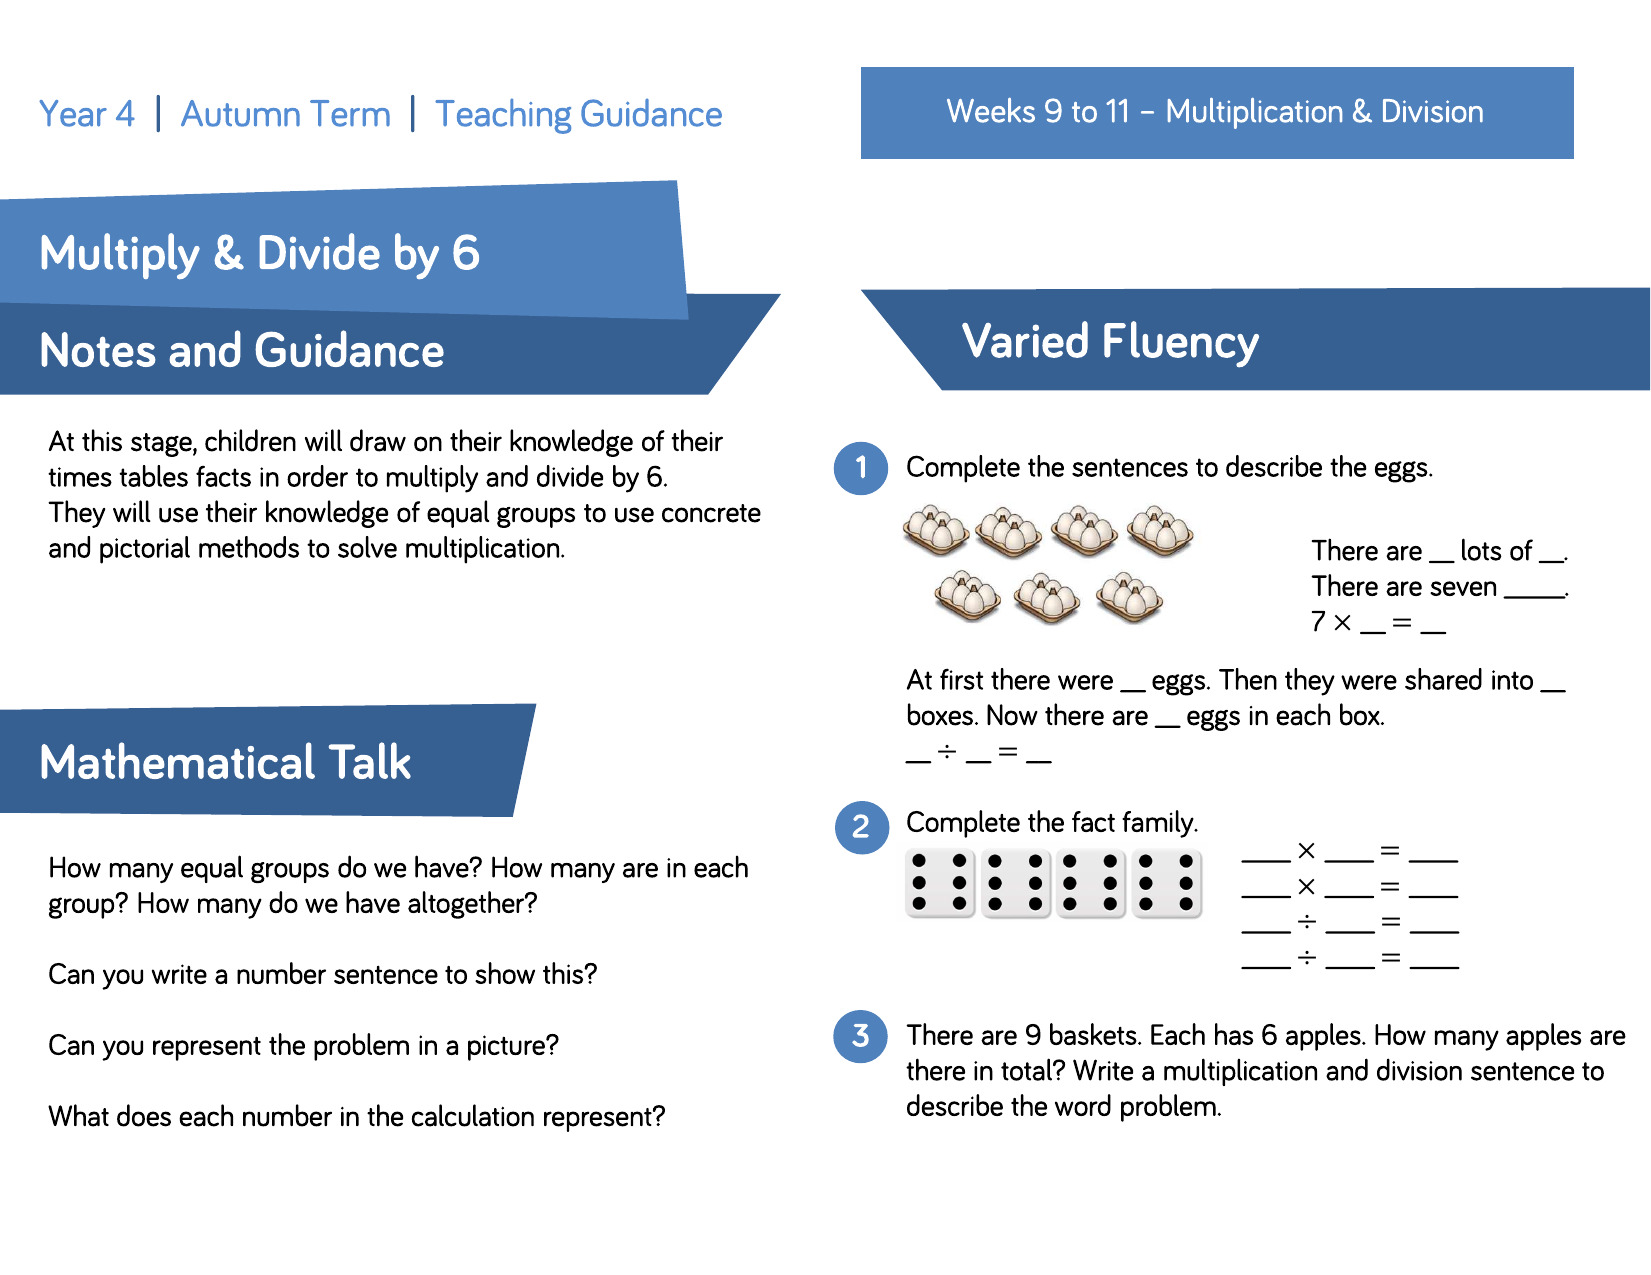 KS2 Maths Resource – Multiply and Divide By 6